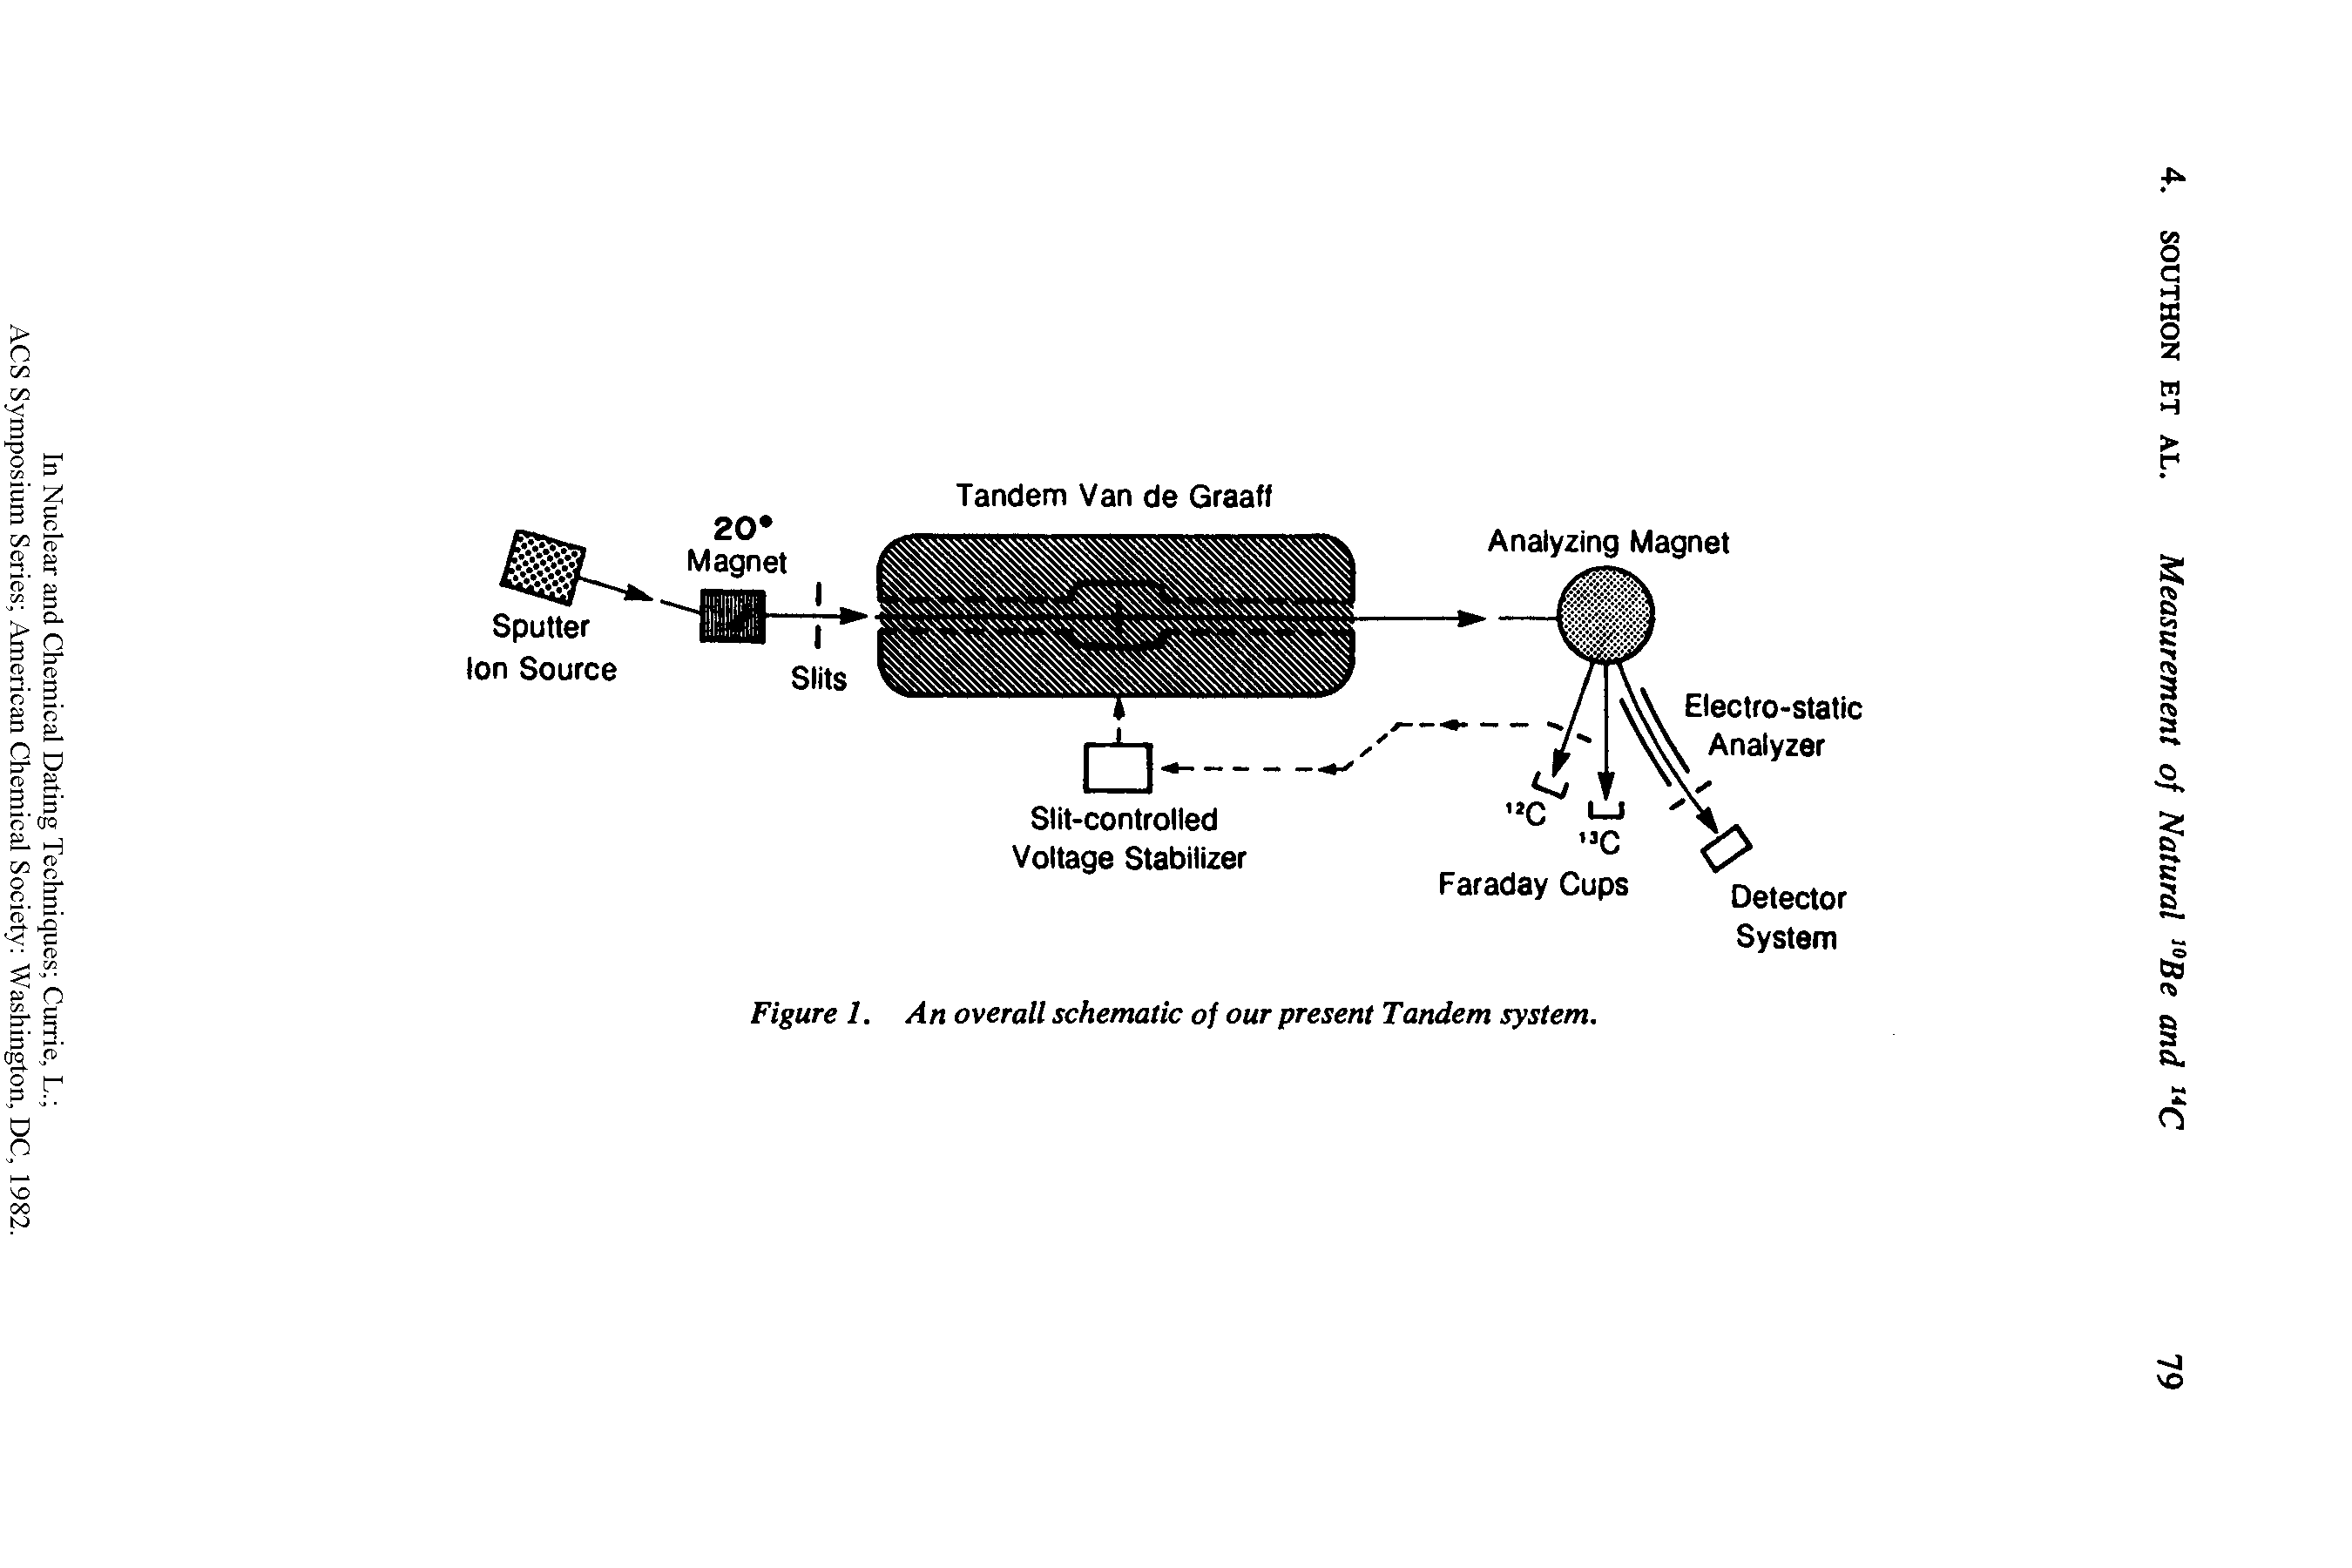 Figure 1. An overall schematic of our present Tandem system.